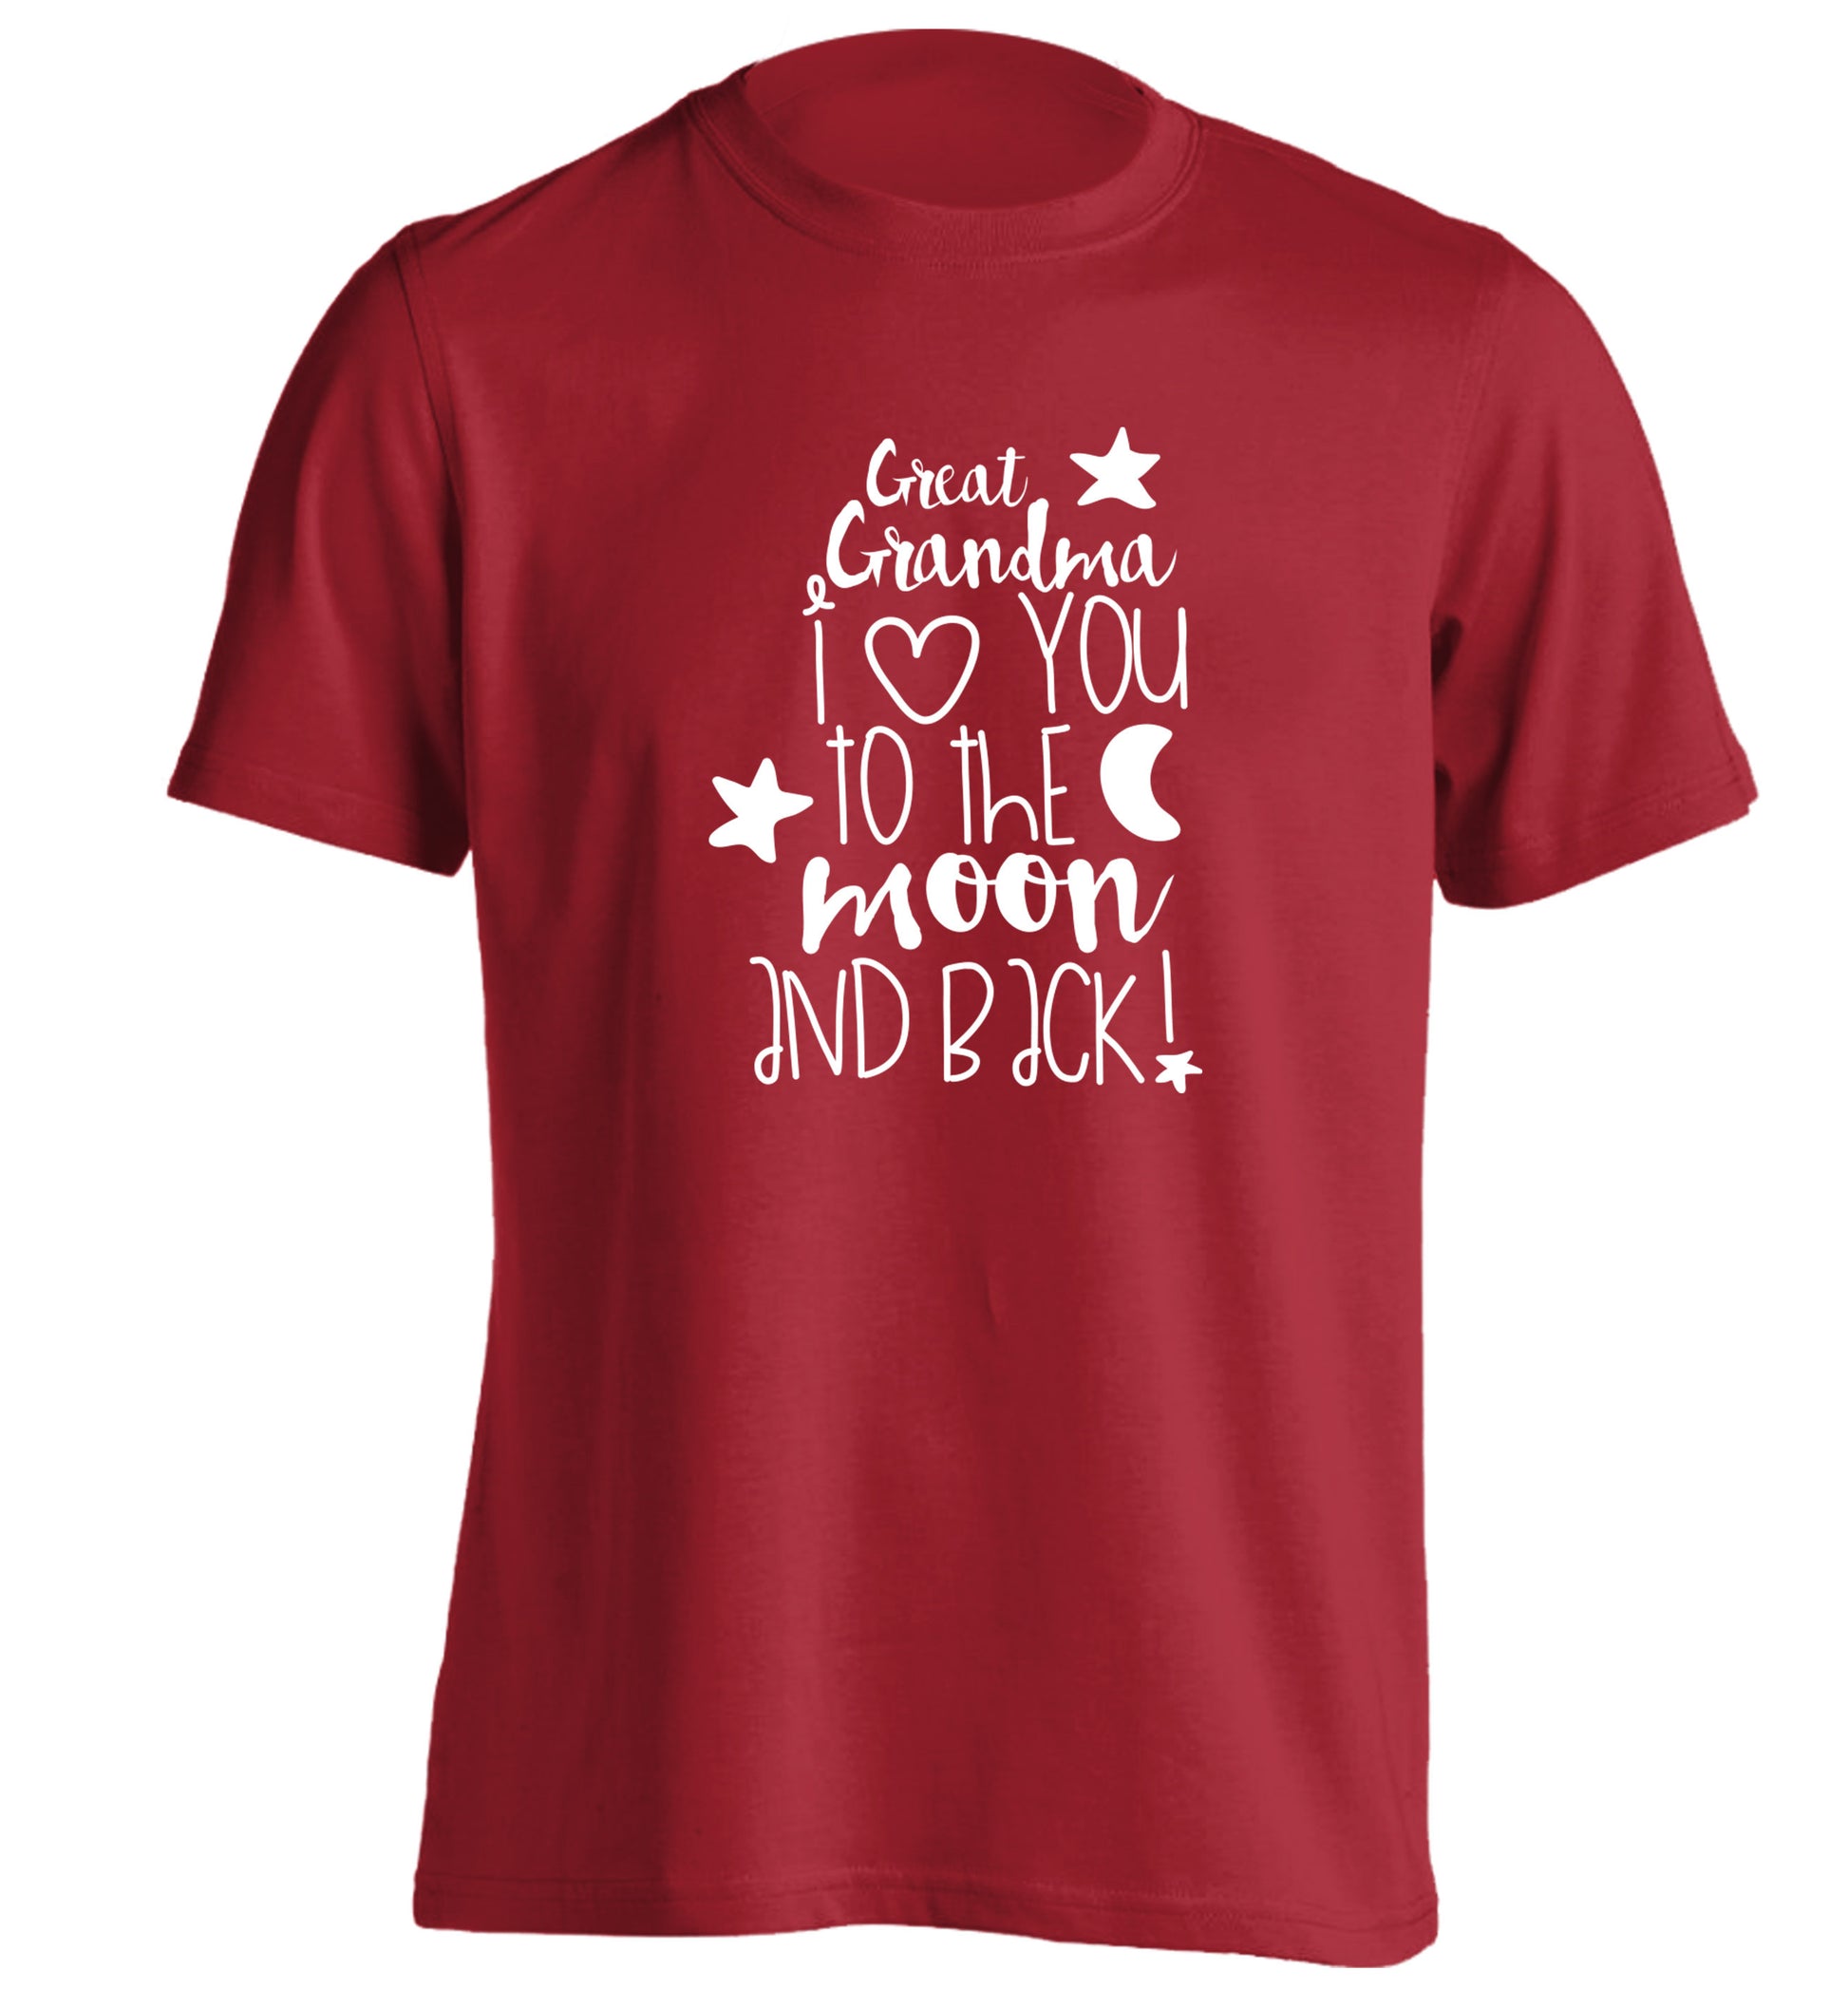 Great Grandma I love you to the moon and back adults unisex red Tshirt 2XL